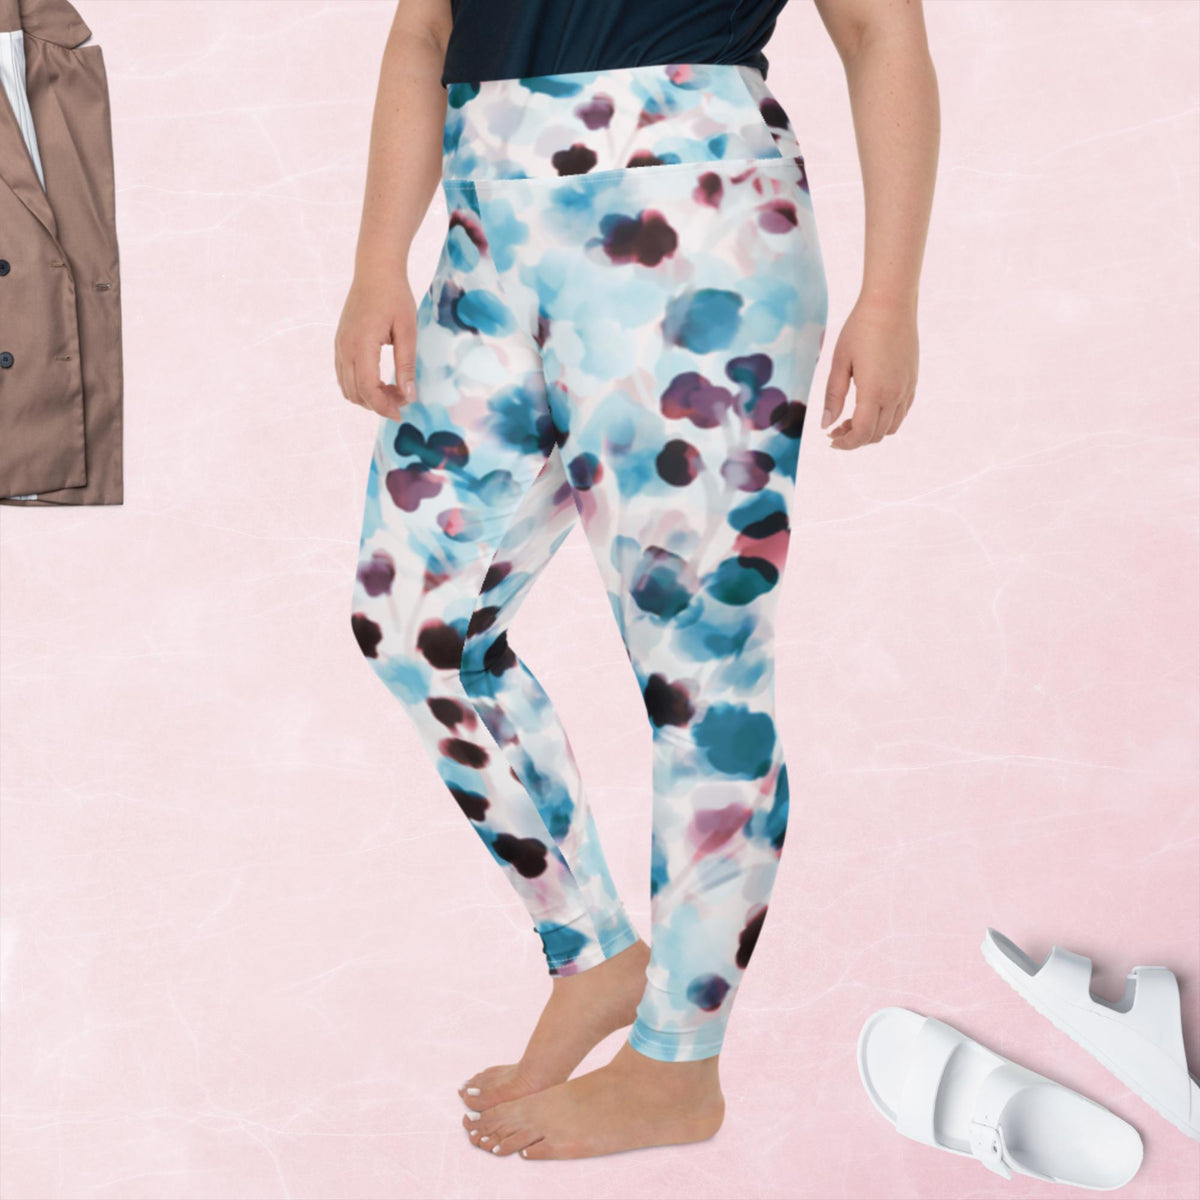 Plus Size Coloured Leggings in Sapphire Print - Revive Wear     Women&#39;s Plus Size Coloured Leggings. Made from a stretchy, comfortable fabric with a flattering fit. High Waist. Shop plus-size leggings today!